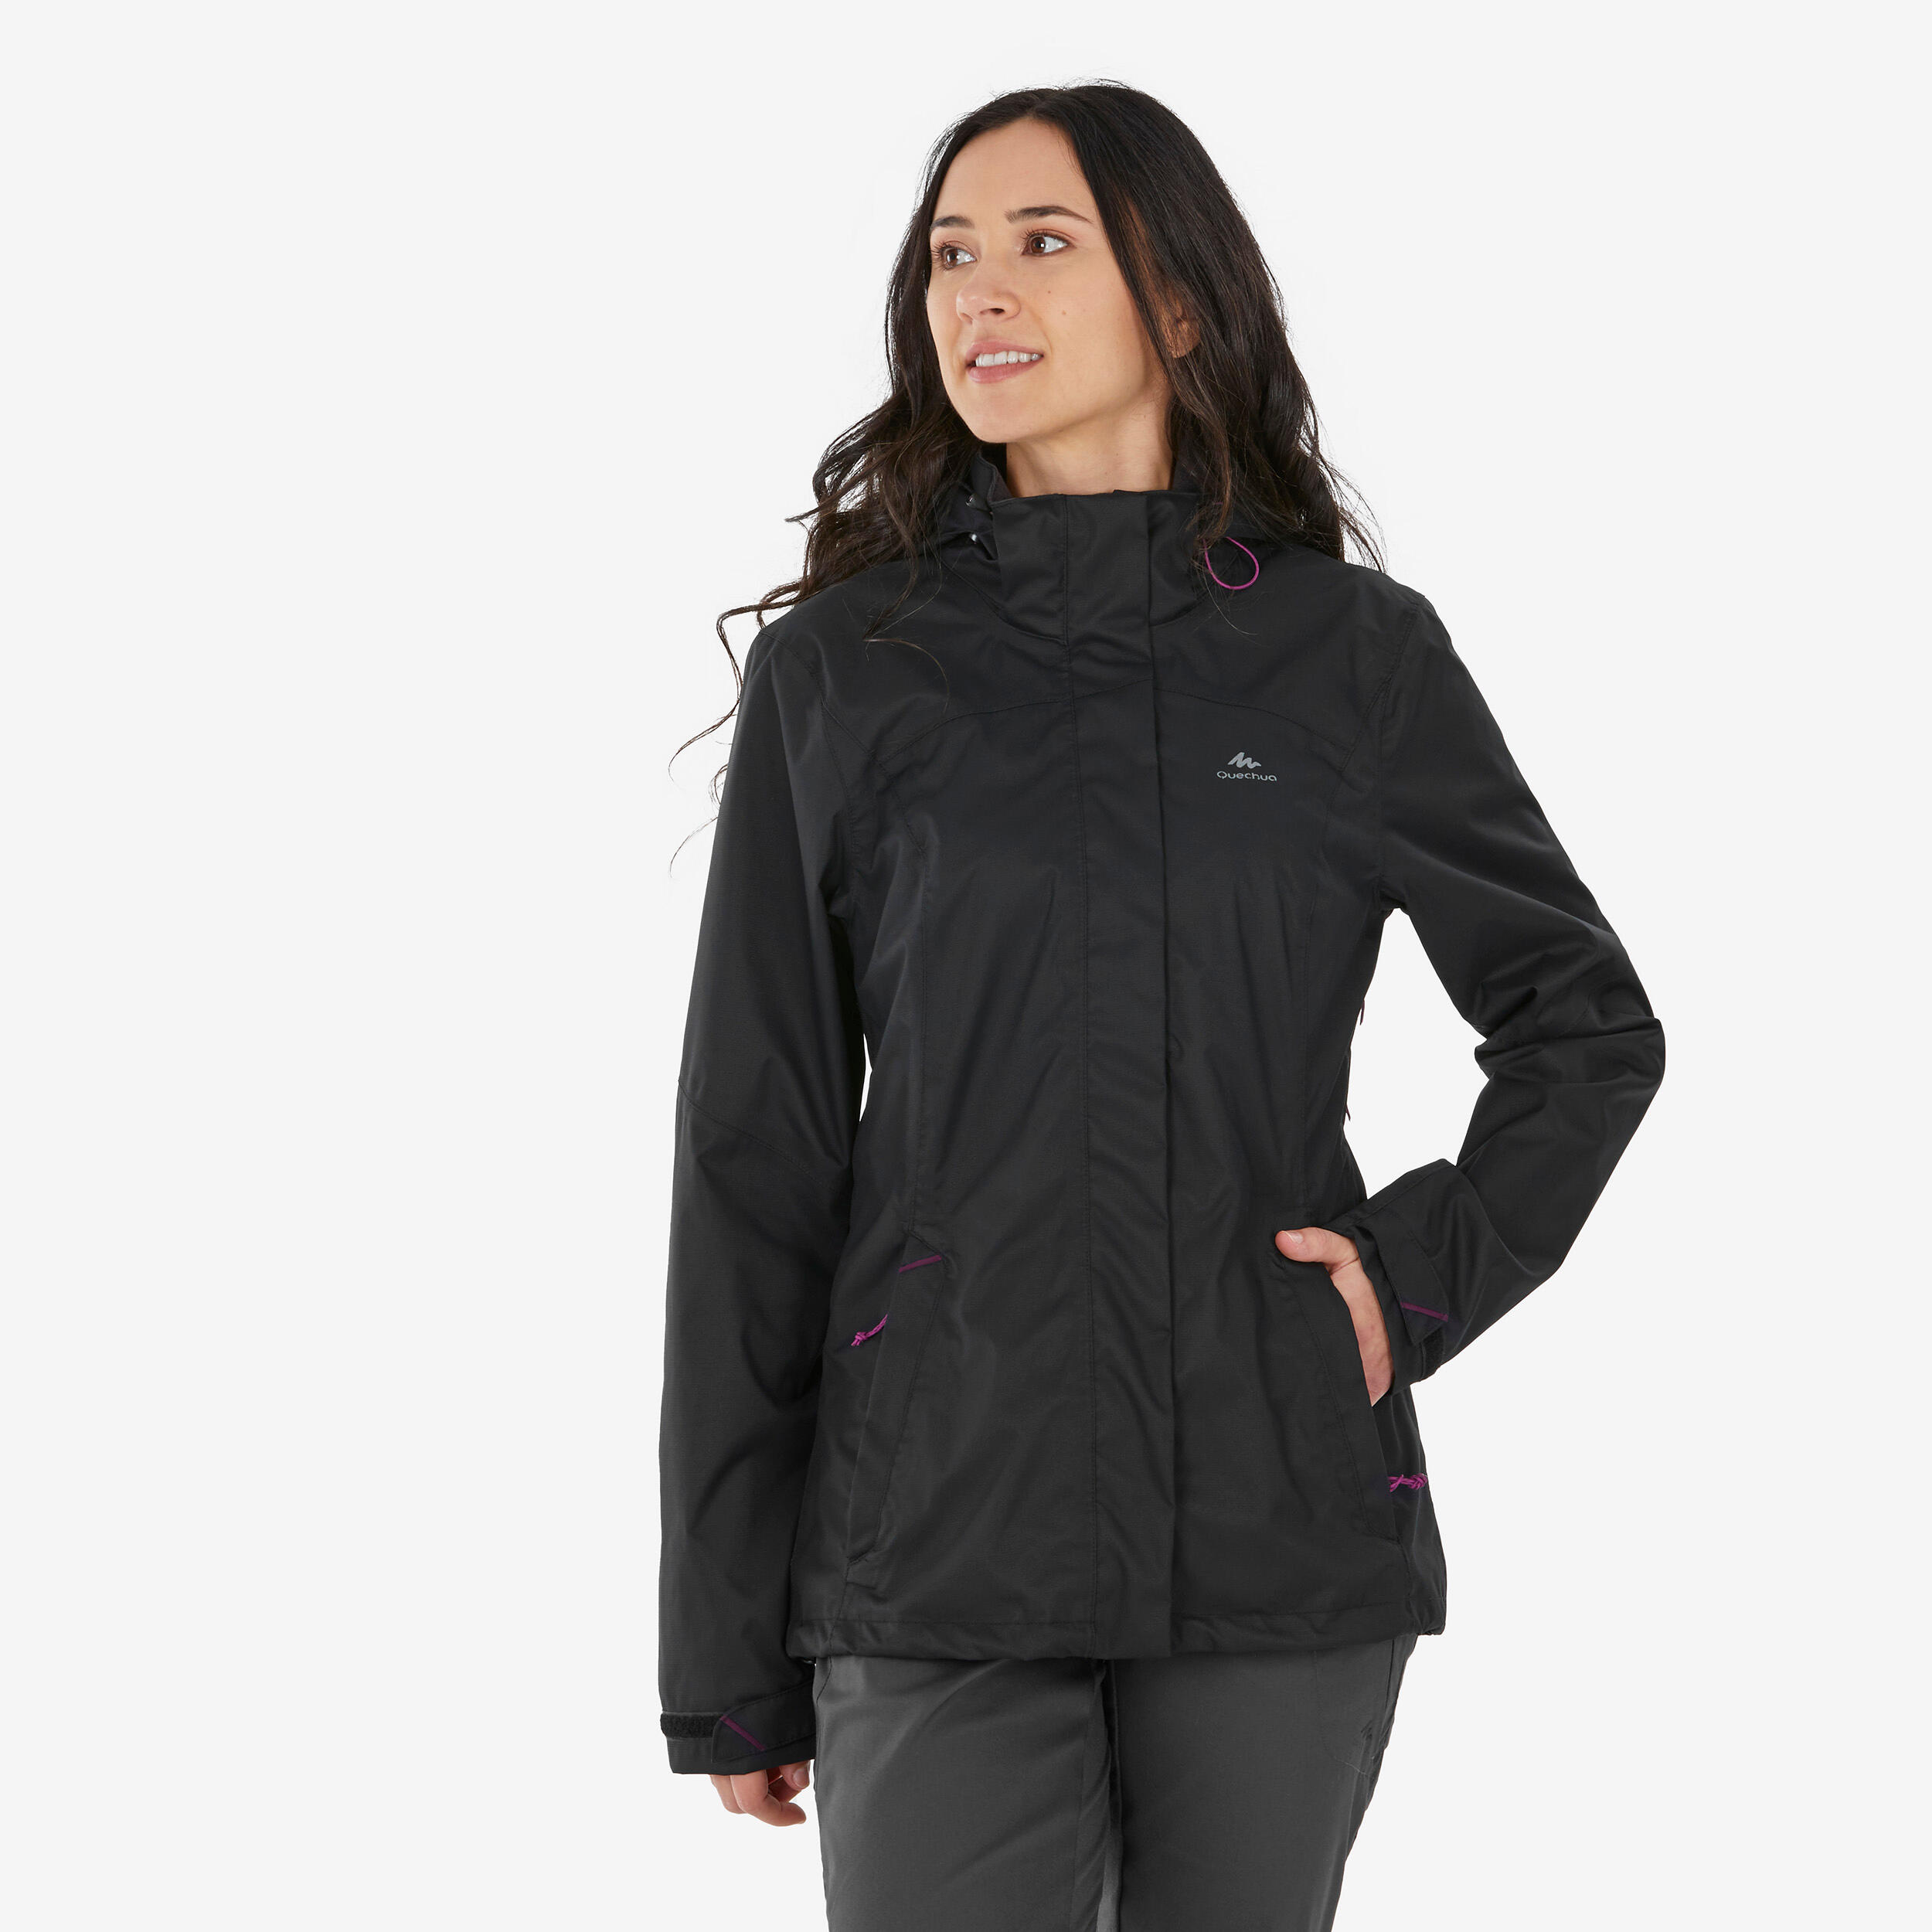 Buy Quechua Arpenaz 3 in 1 Jacket Black - Size L Online at Low Prices in  India - Amazon.in